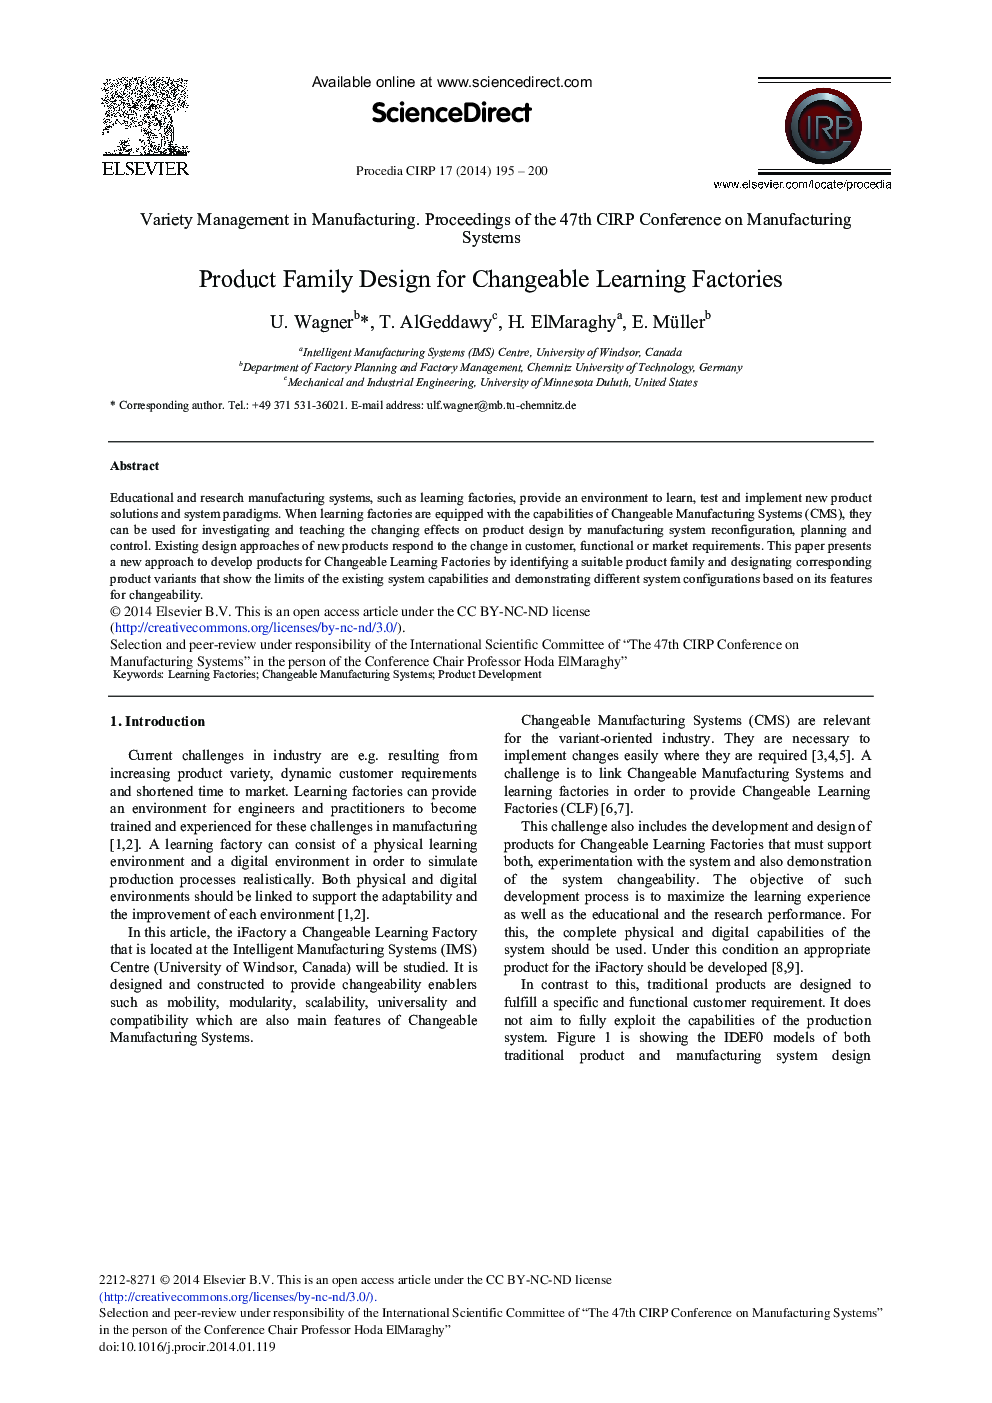 Product Family Design for Changeable Learning Factories 